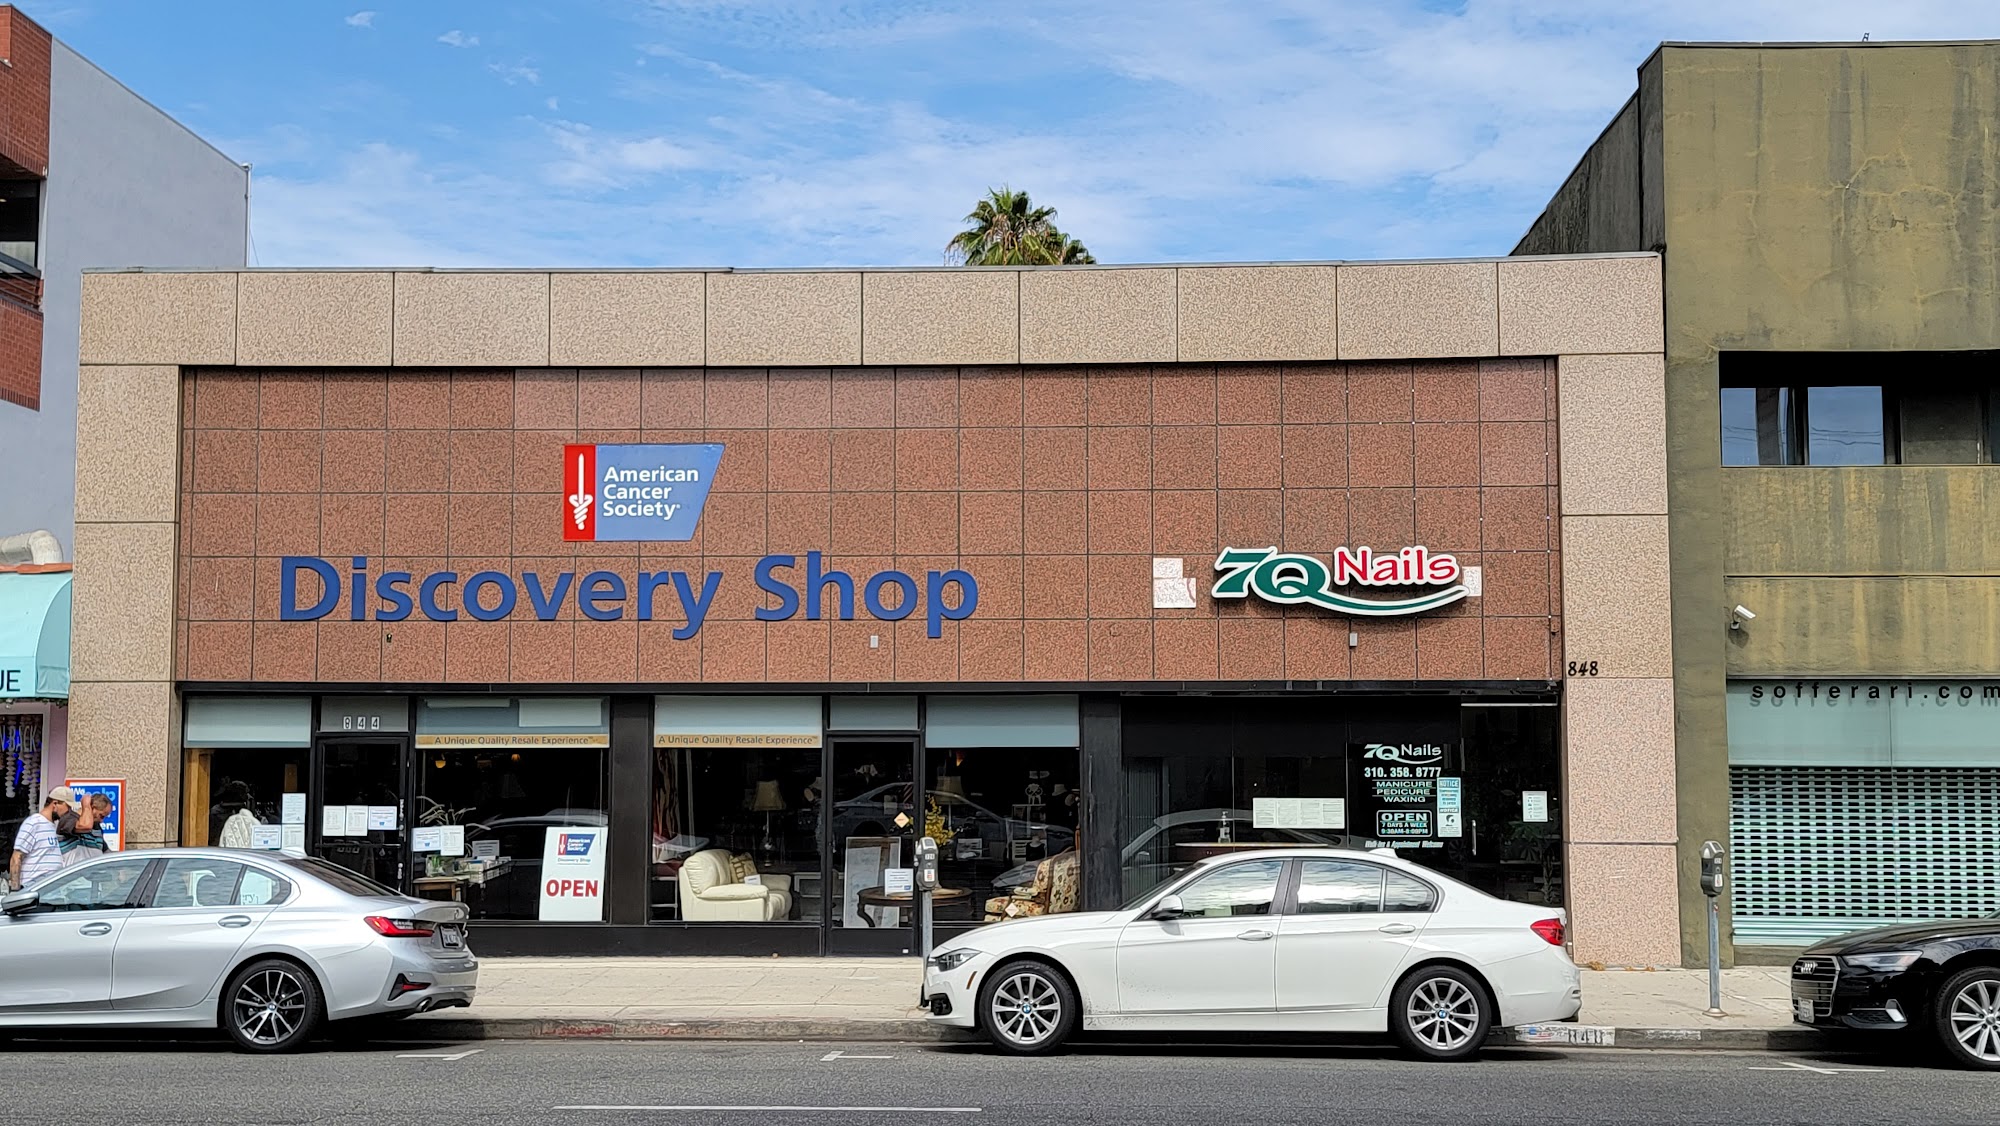 American Cancer Society Discovery Shop - Los Angeles, CA